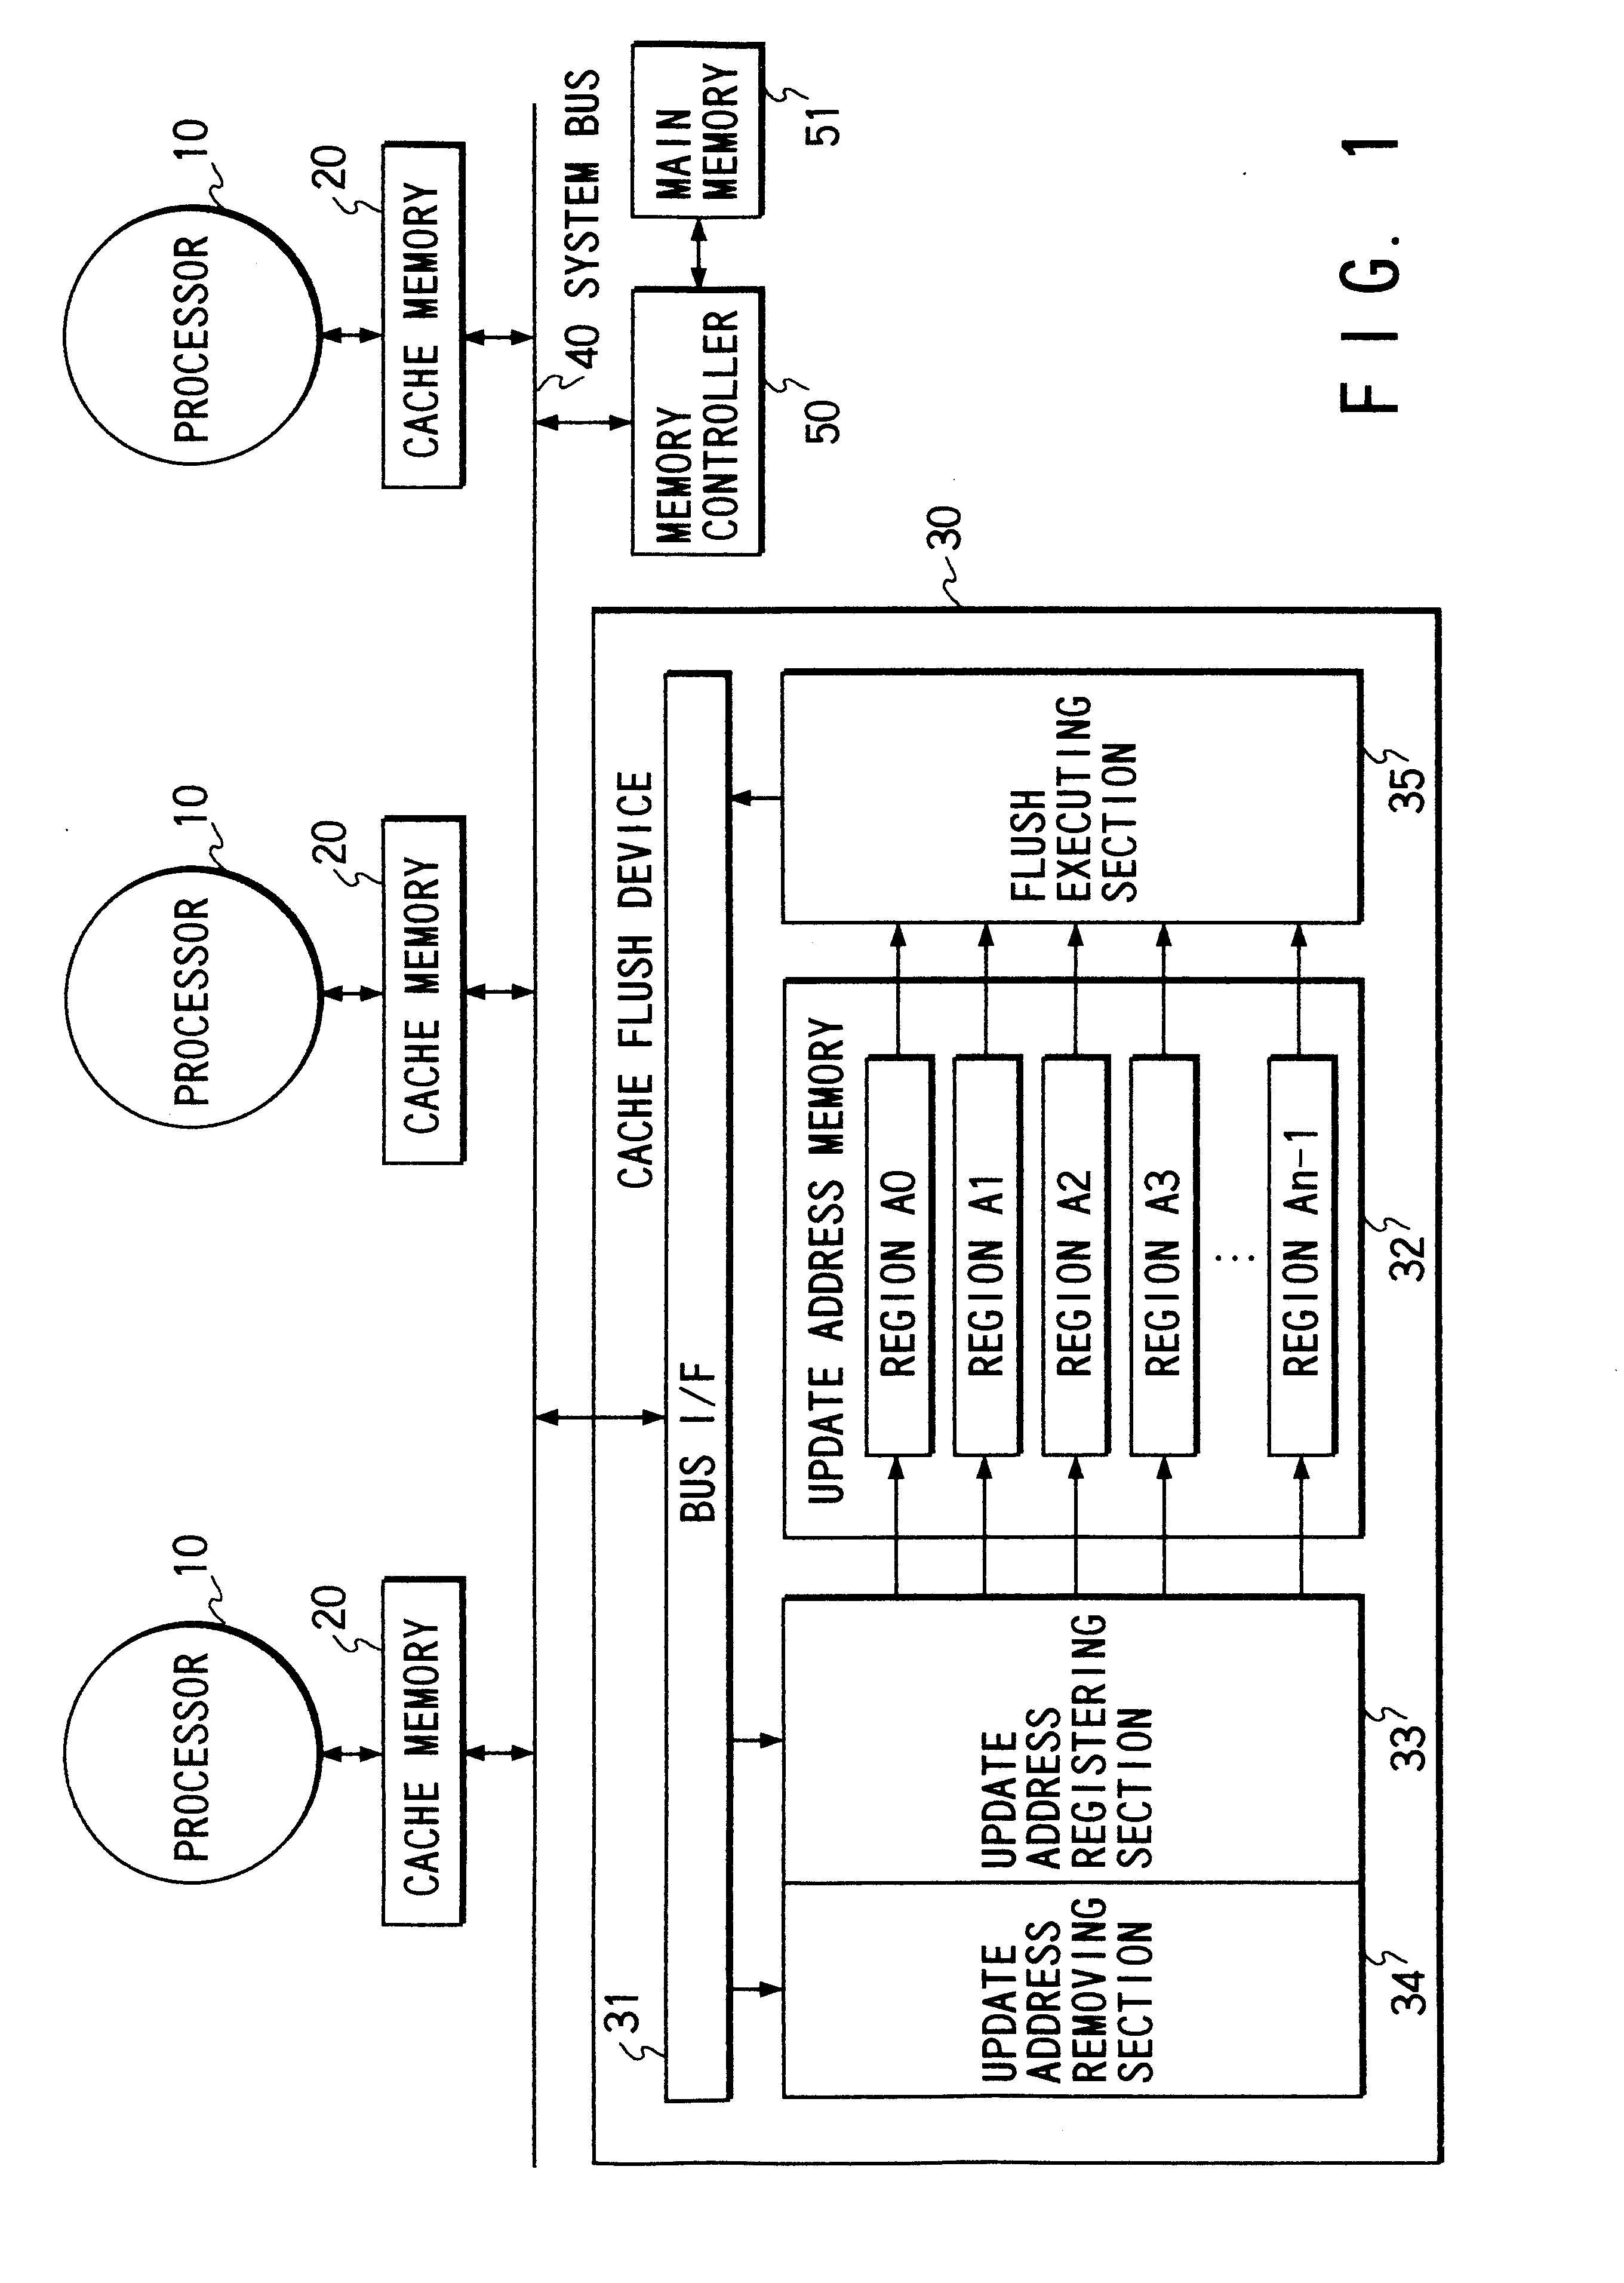 Cache flush apparatus and computer system having the same